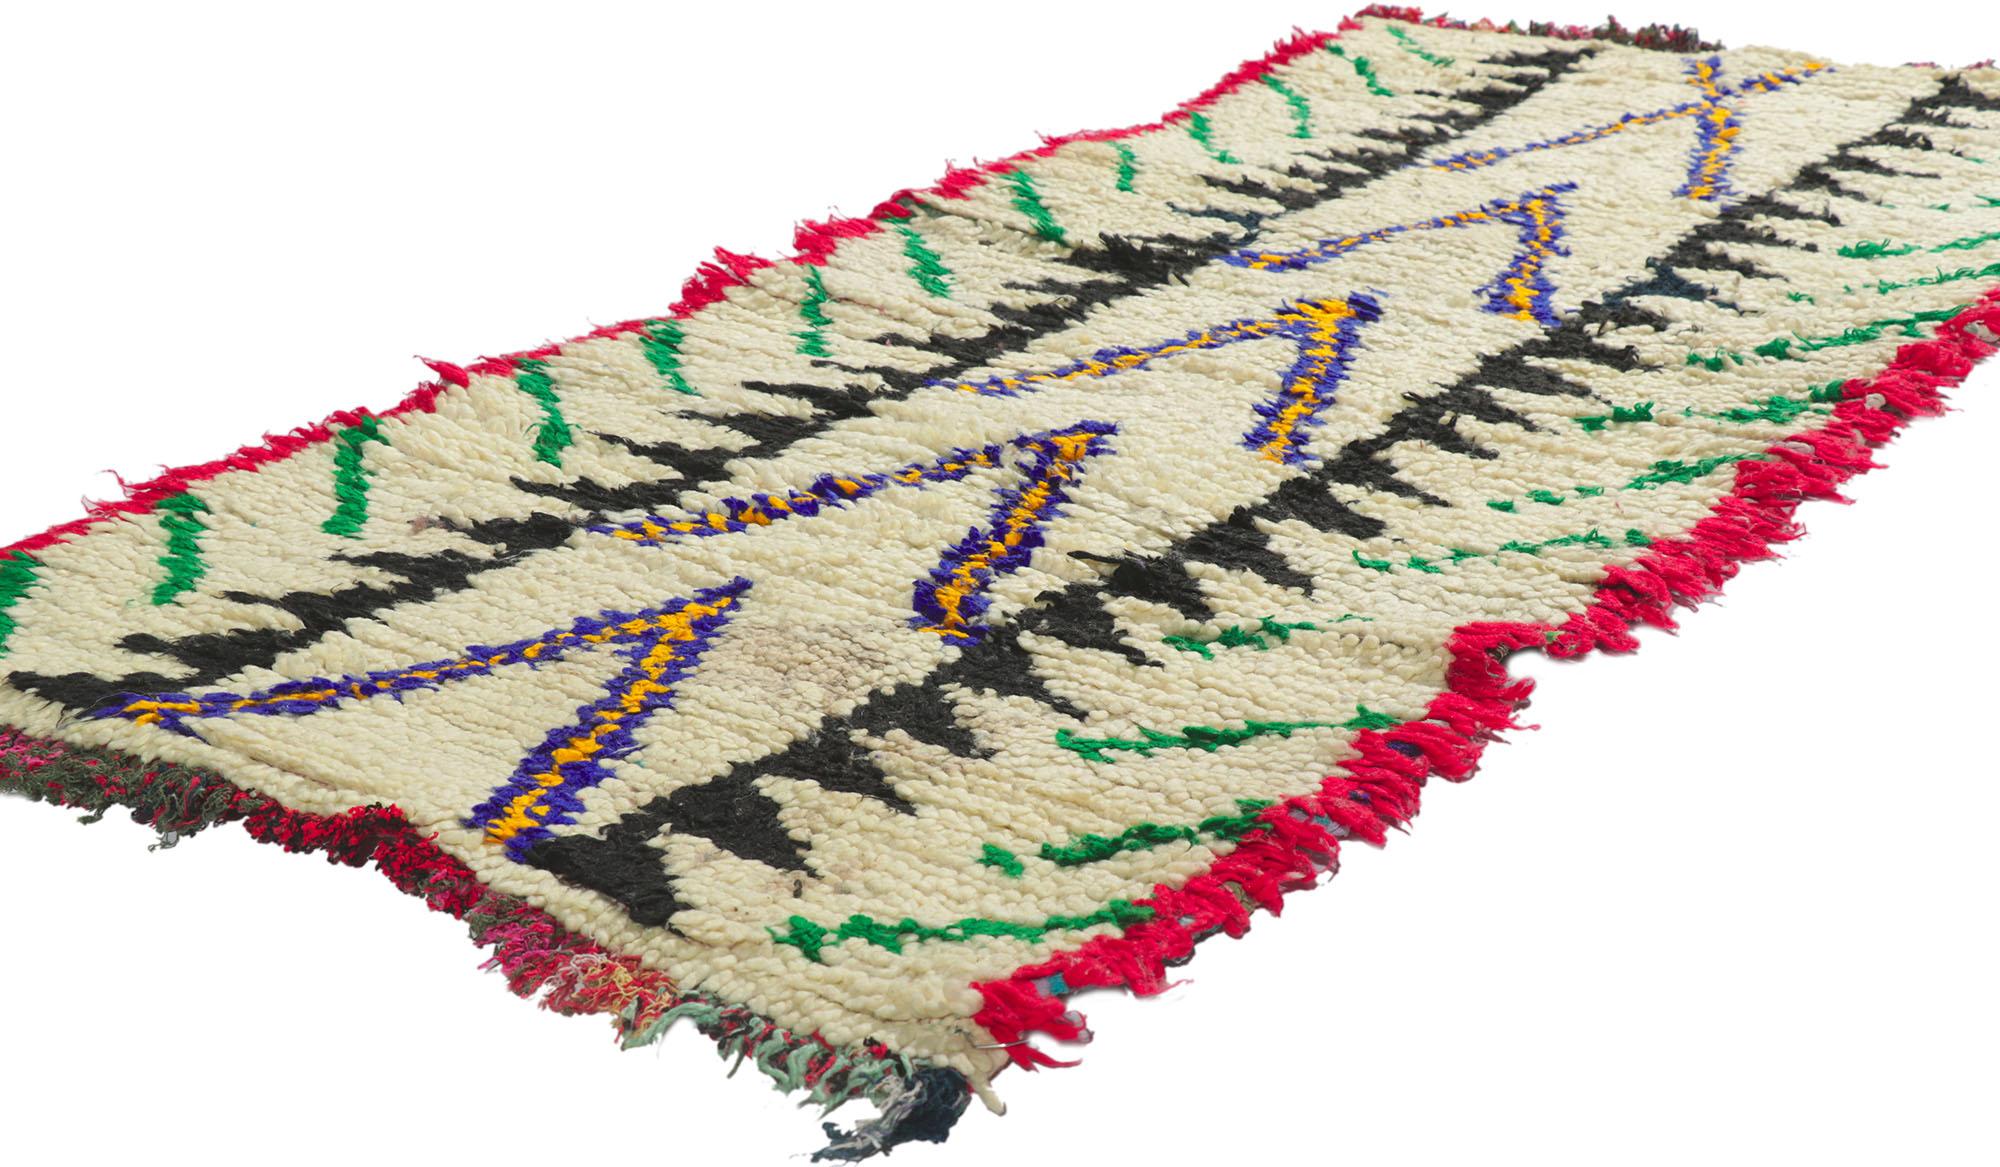 21606 Vintage Boucherouite Moroccan Rag Rug, 02'05 x 05'06.
​Tribal boho meets vibrant jungalow style in this hand knotted vintage Boucherouite Moroccan rag rug. The tribal design and lively colors woven into this piece work together creating a